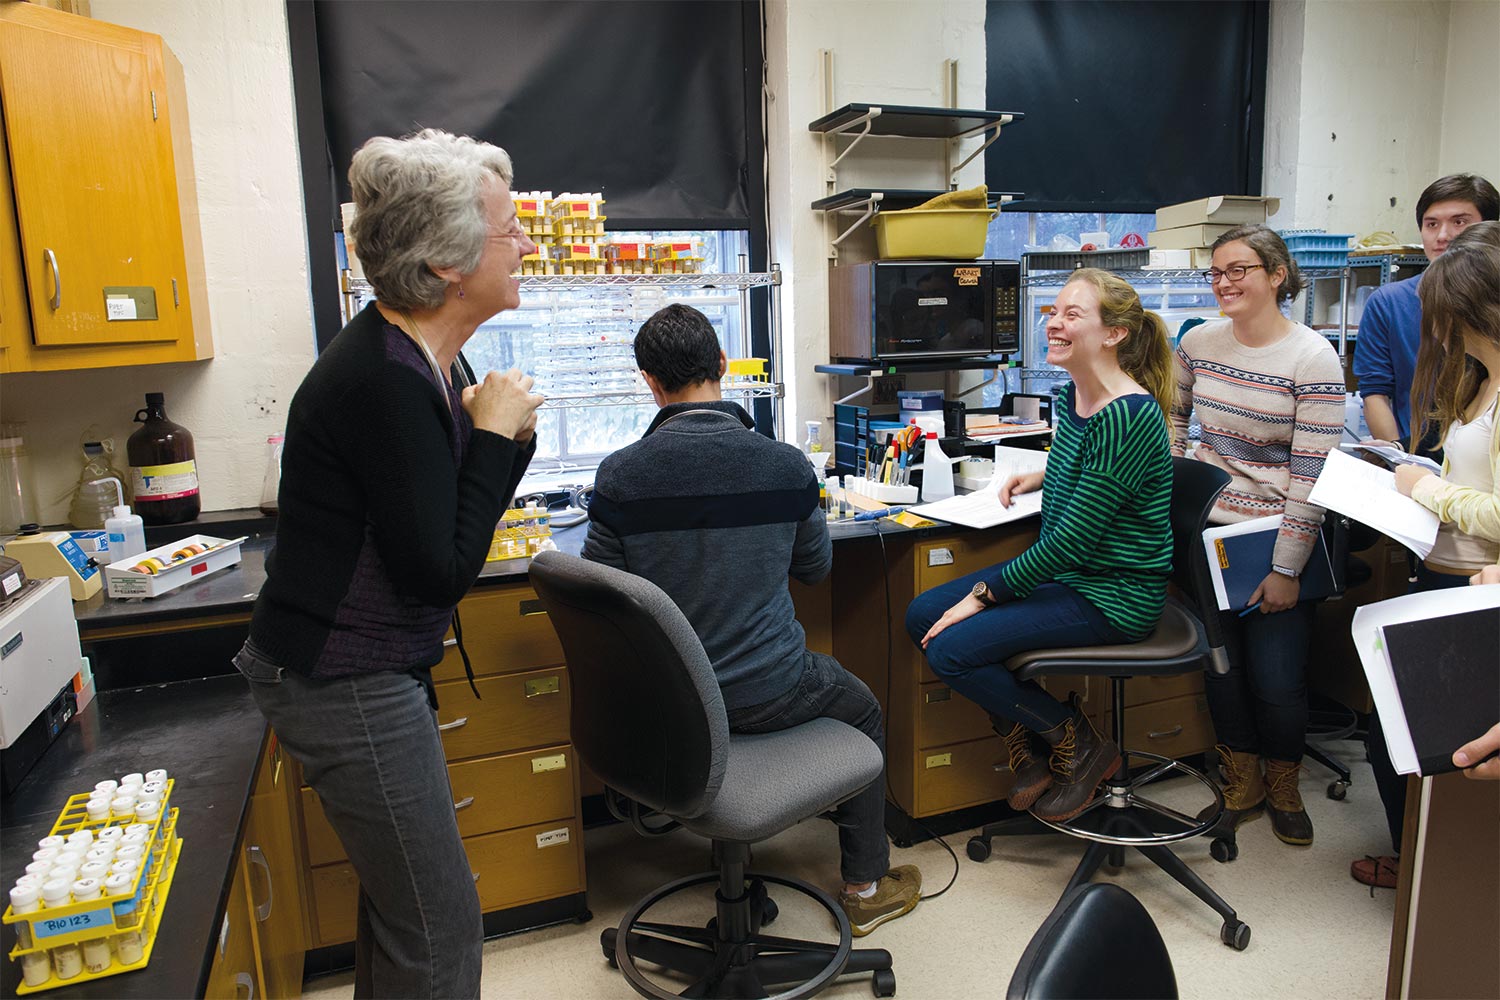 Swarthmore’s professor laughs with her students